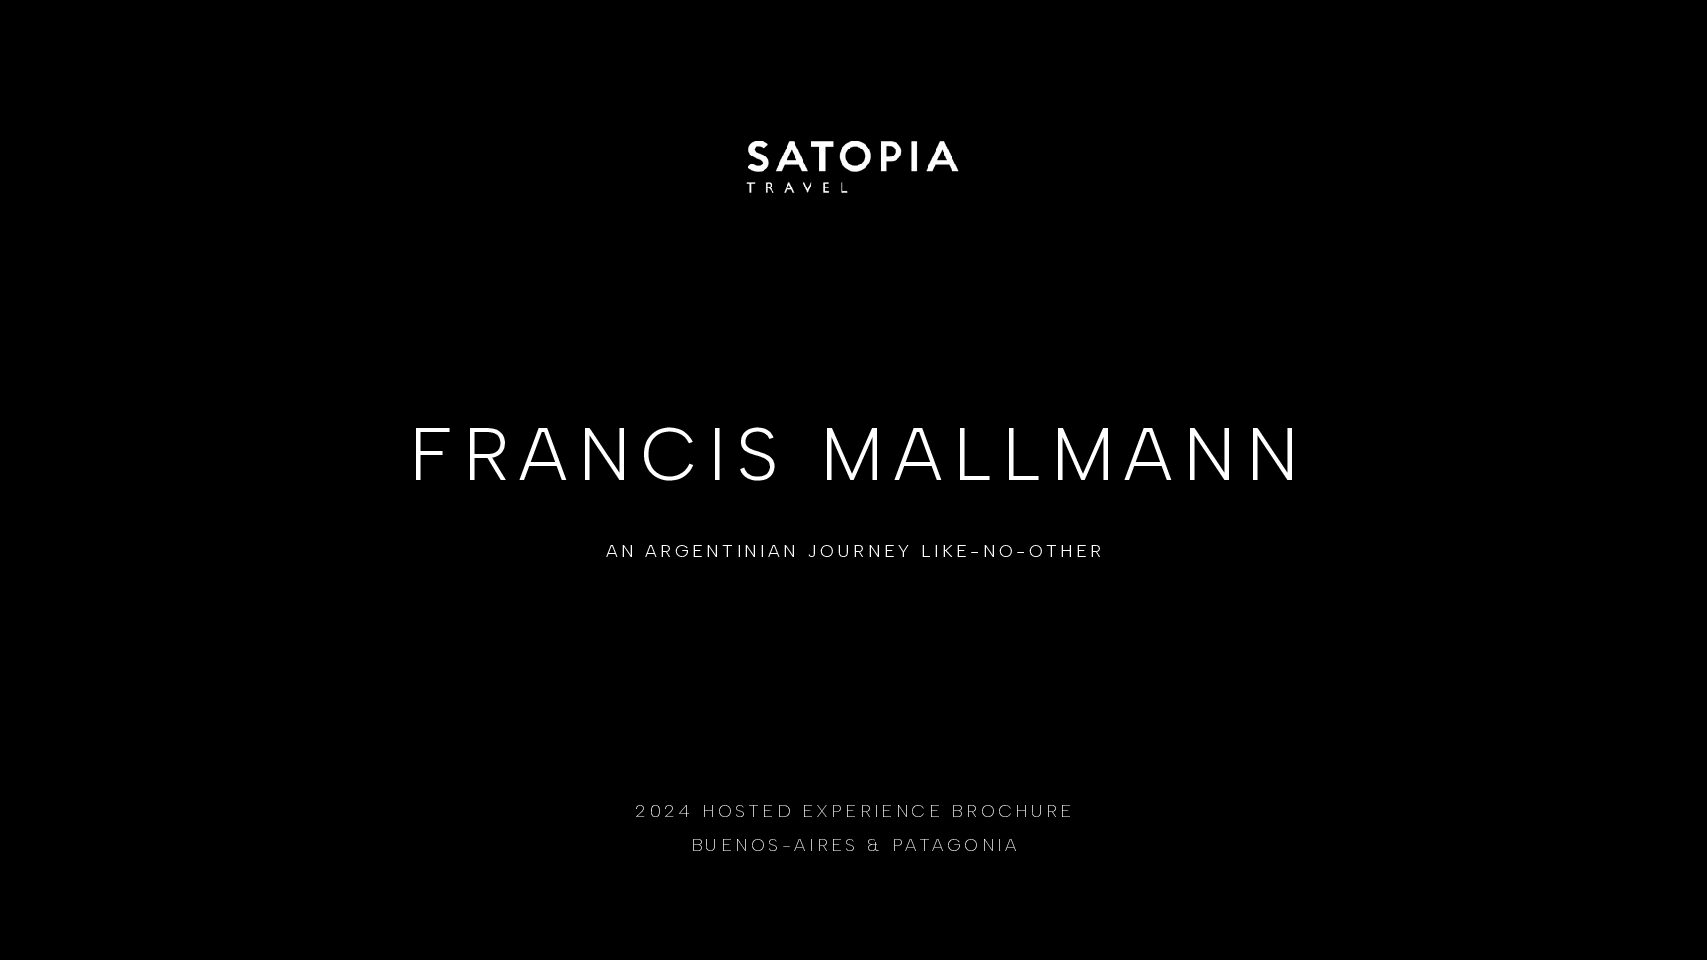 Satopia Travel Hosted Experience by Francis Mallmann in Argentina 2024 pdf - MAMULA ISLAND